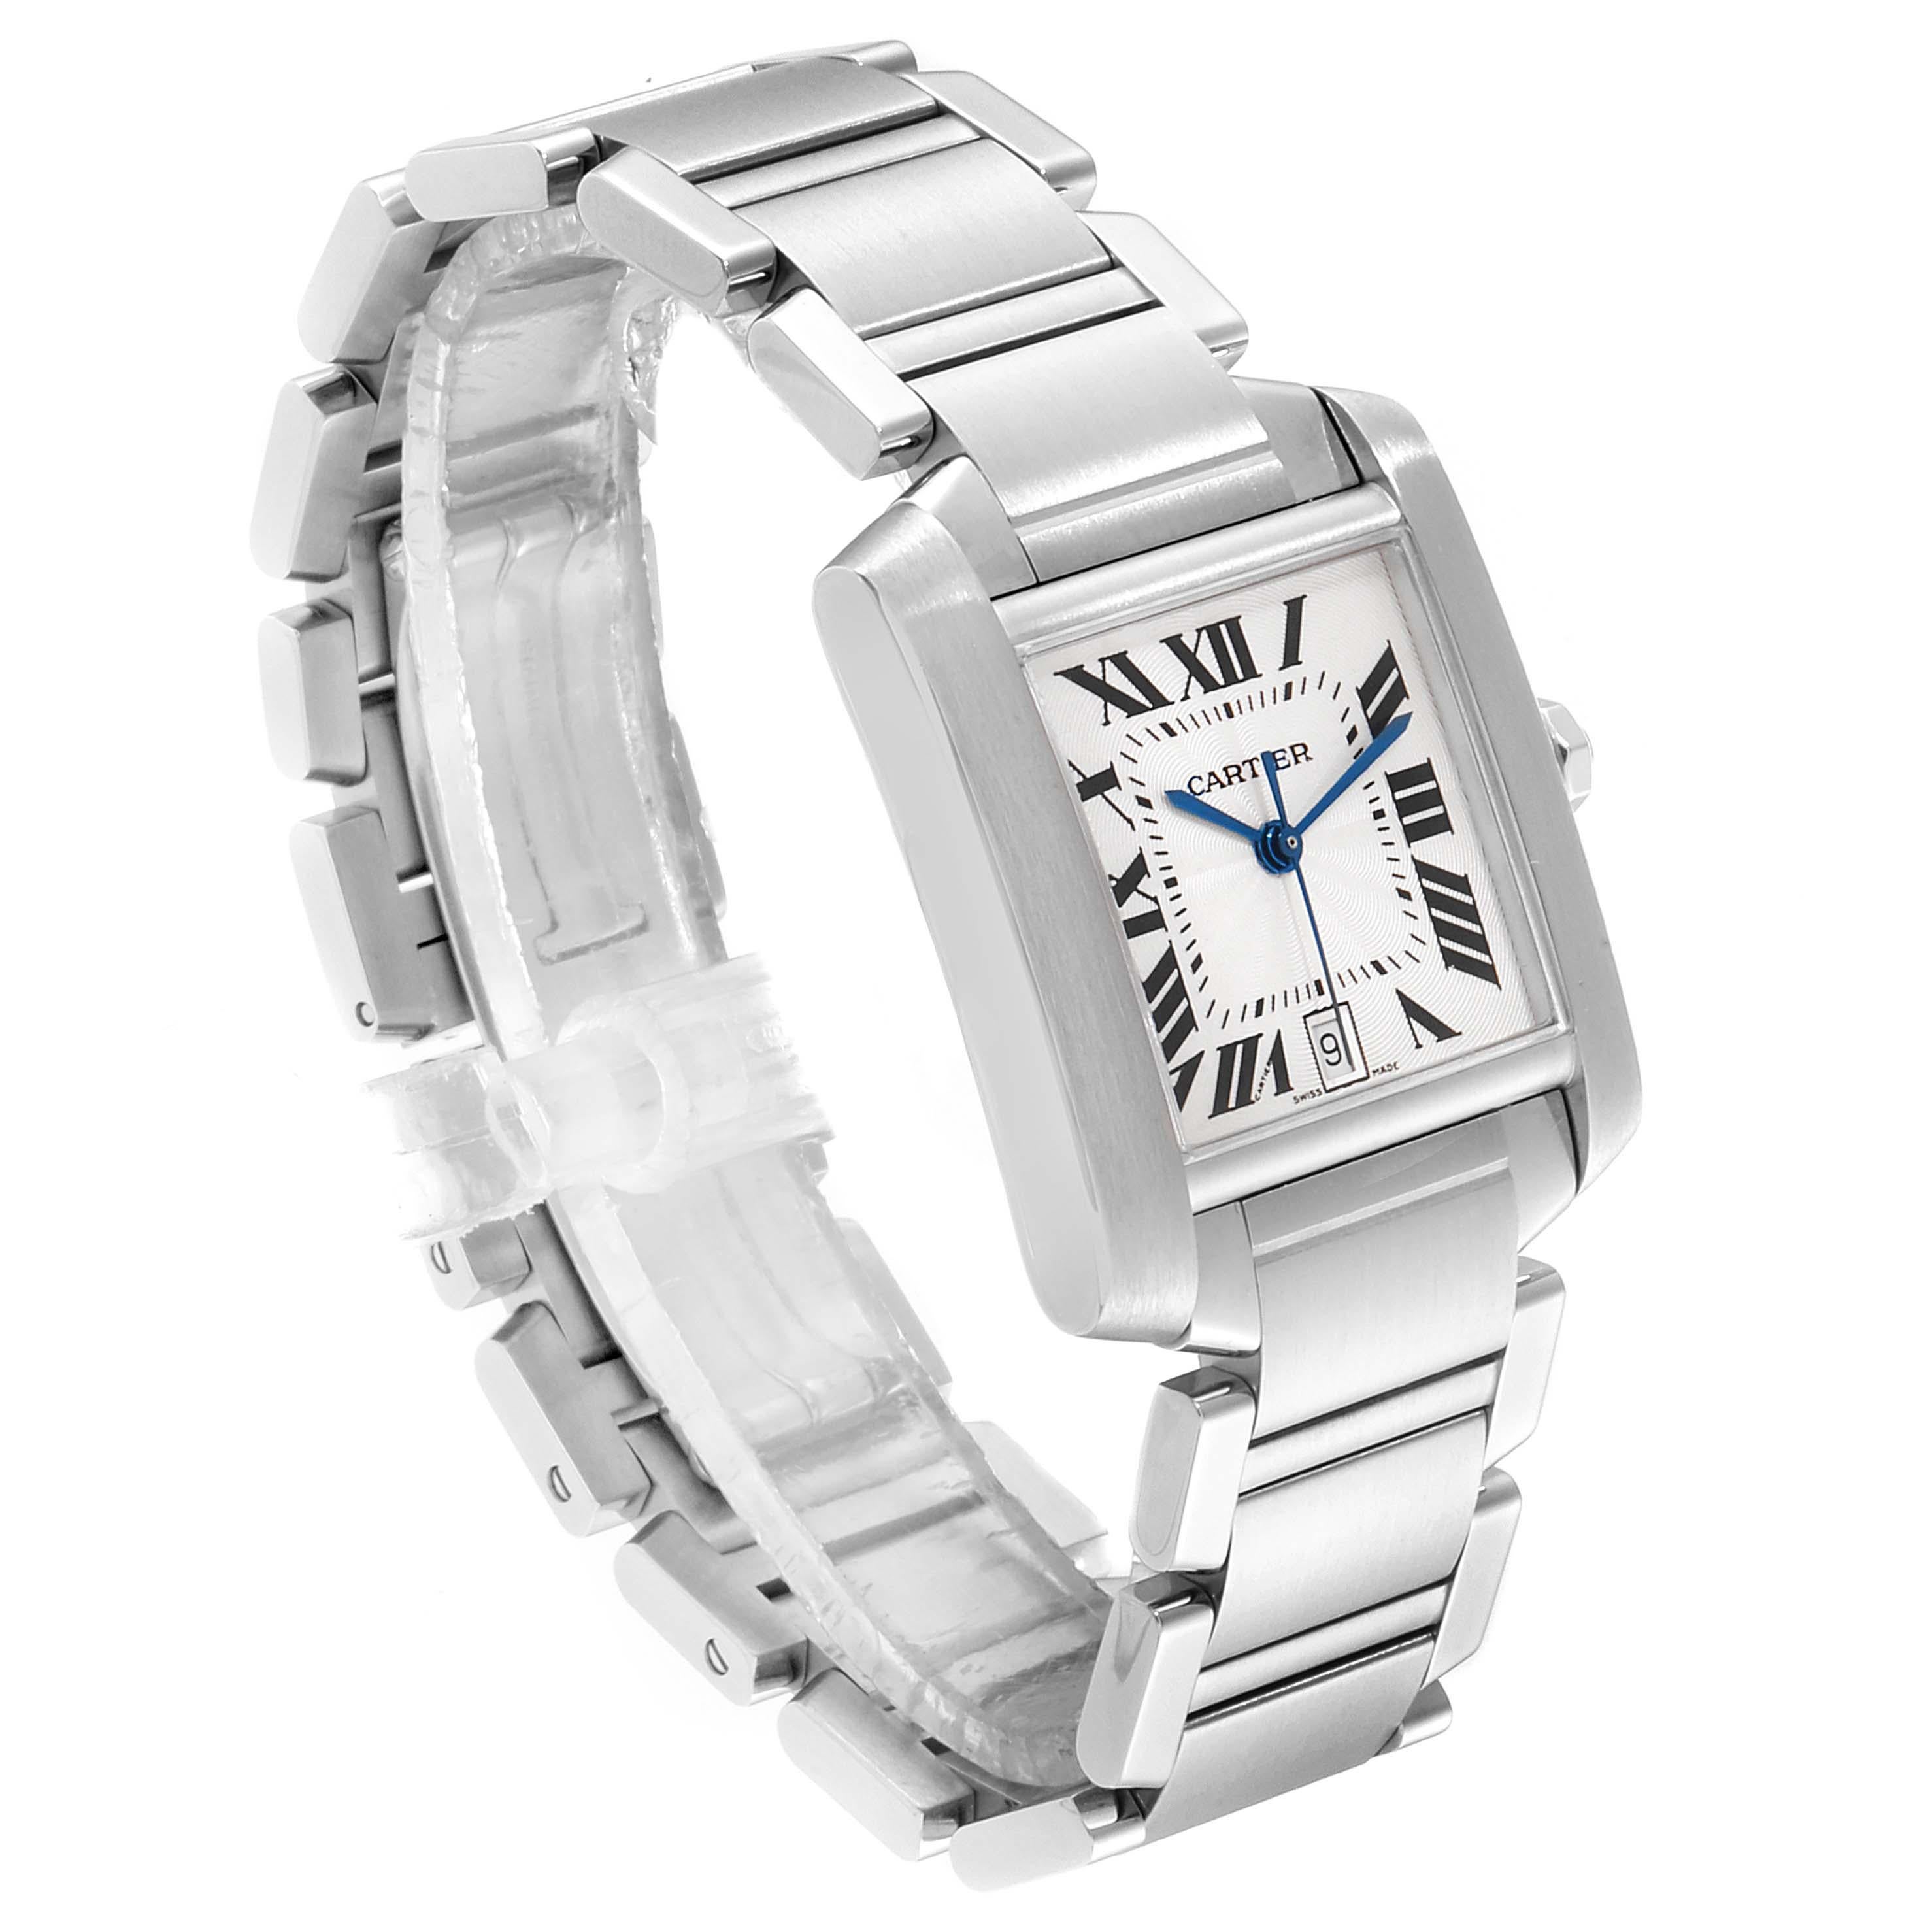 Cartier Tank Francaise Silver Dial Automatic Steel Men's Watch W51002Q3 For Sale 1